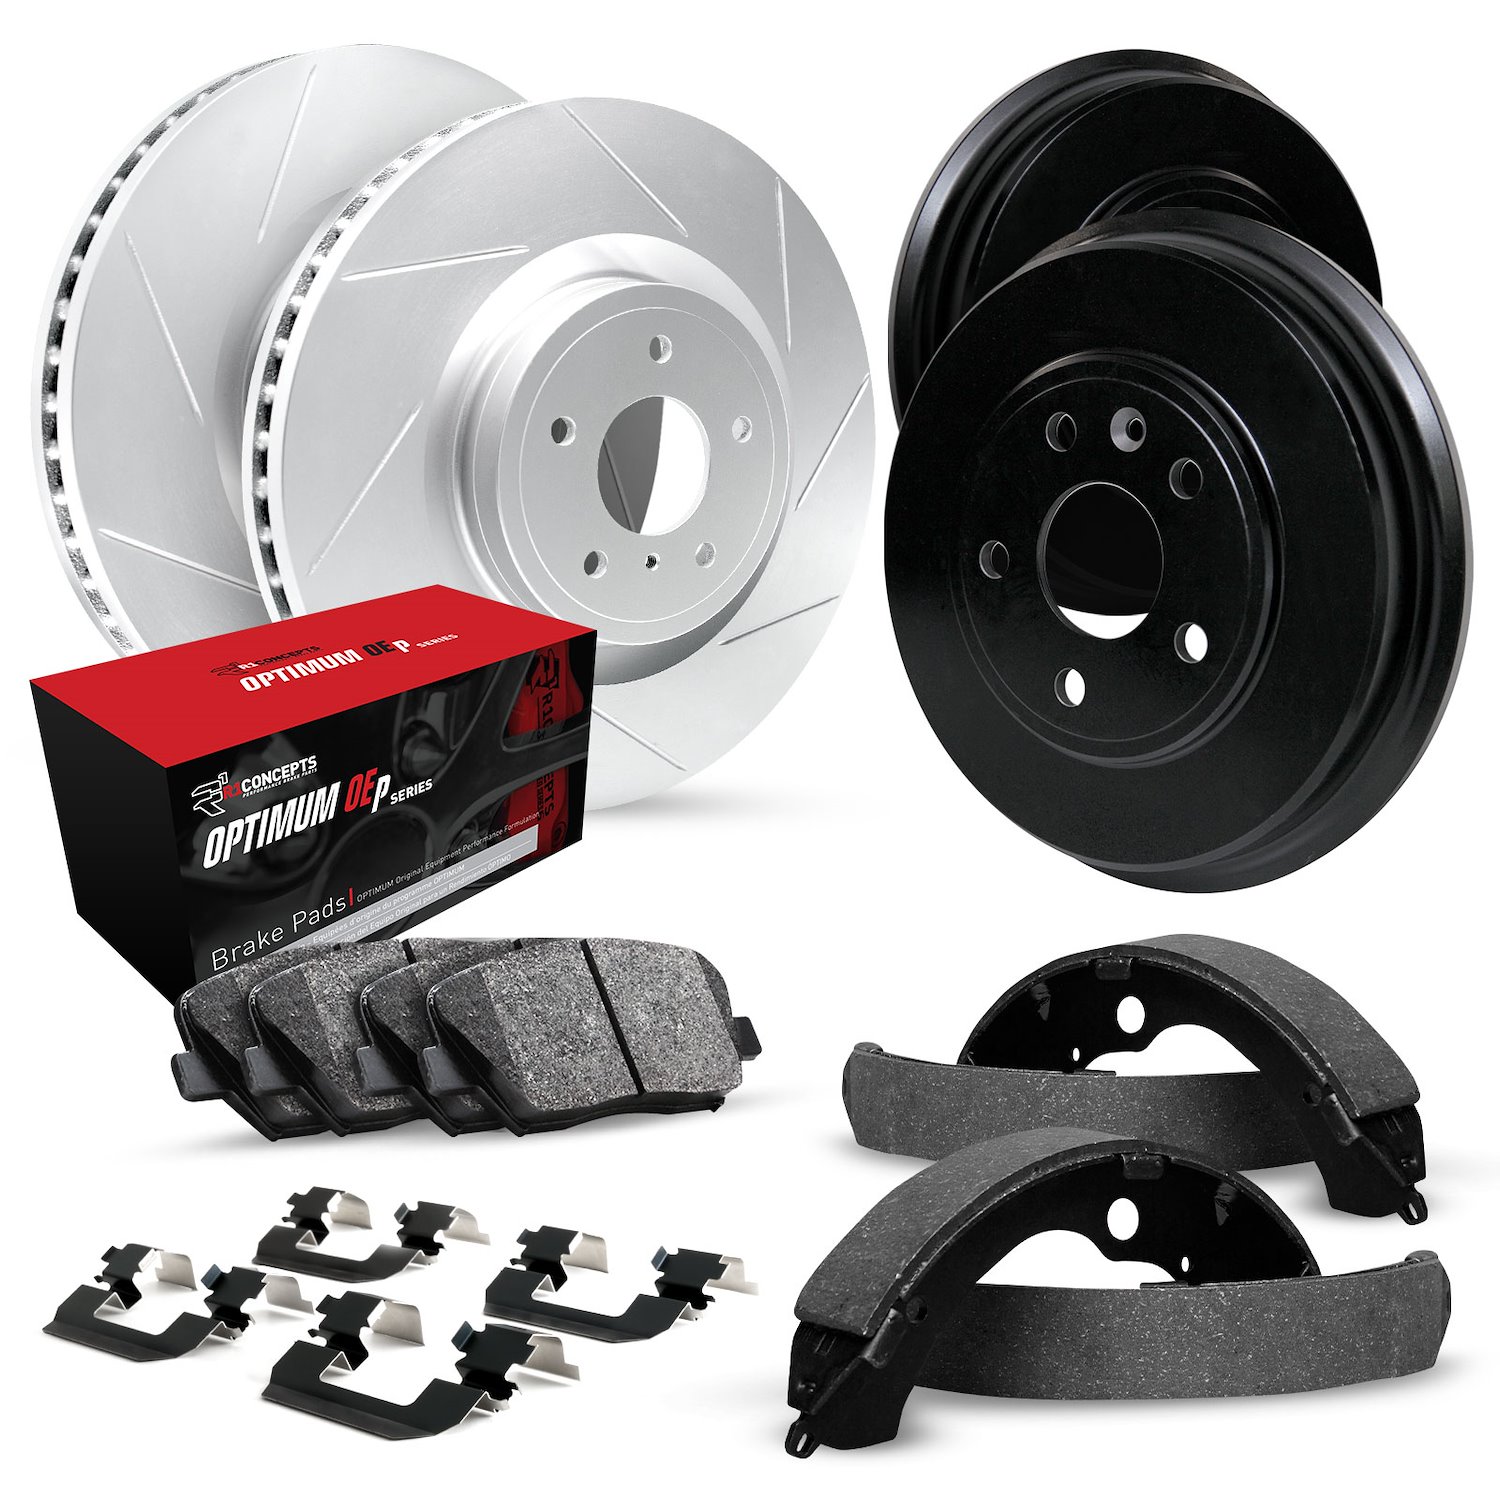 GEO-Carbon Slotted Brake Rotor & Drum Set w/Optimum OE Pads, Shoes, & Hardware, 1998-2000 GM, Position: Front & Rear